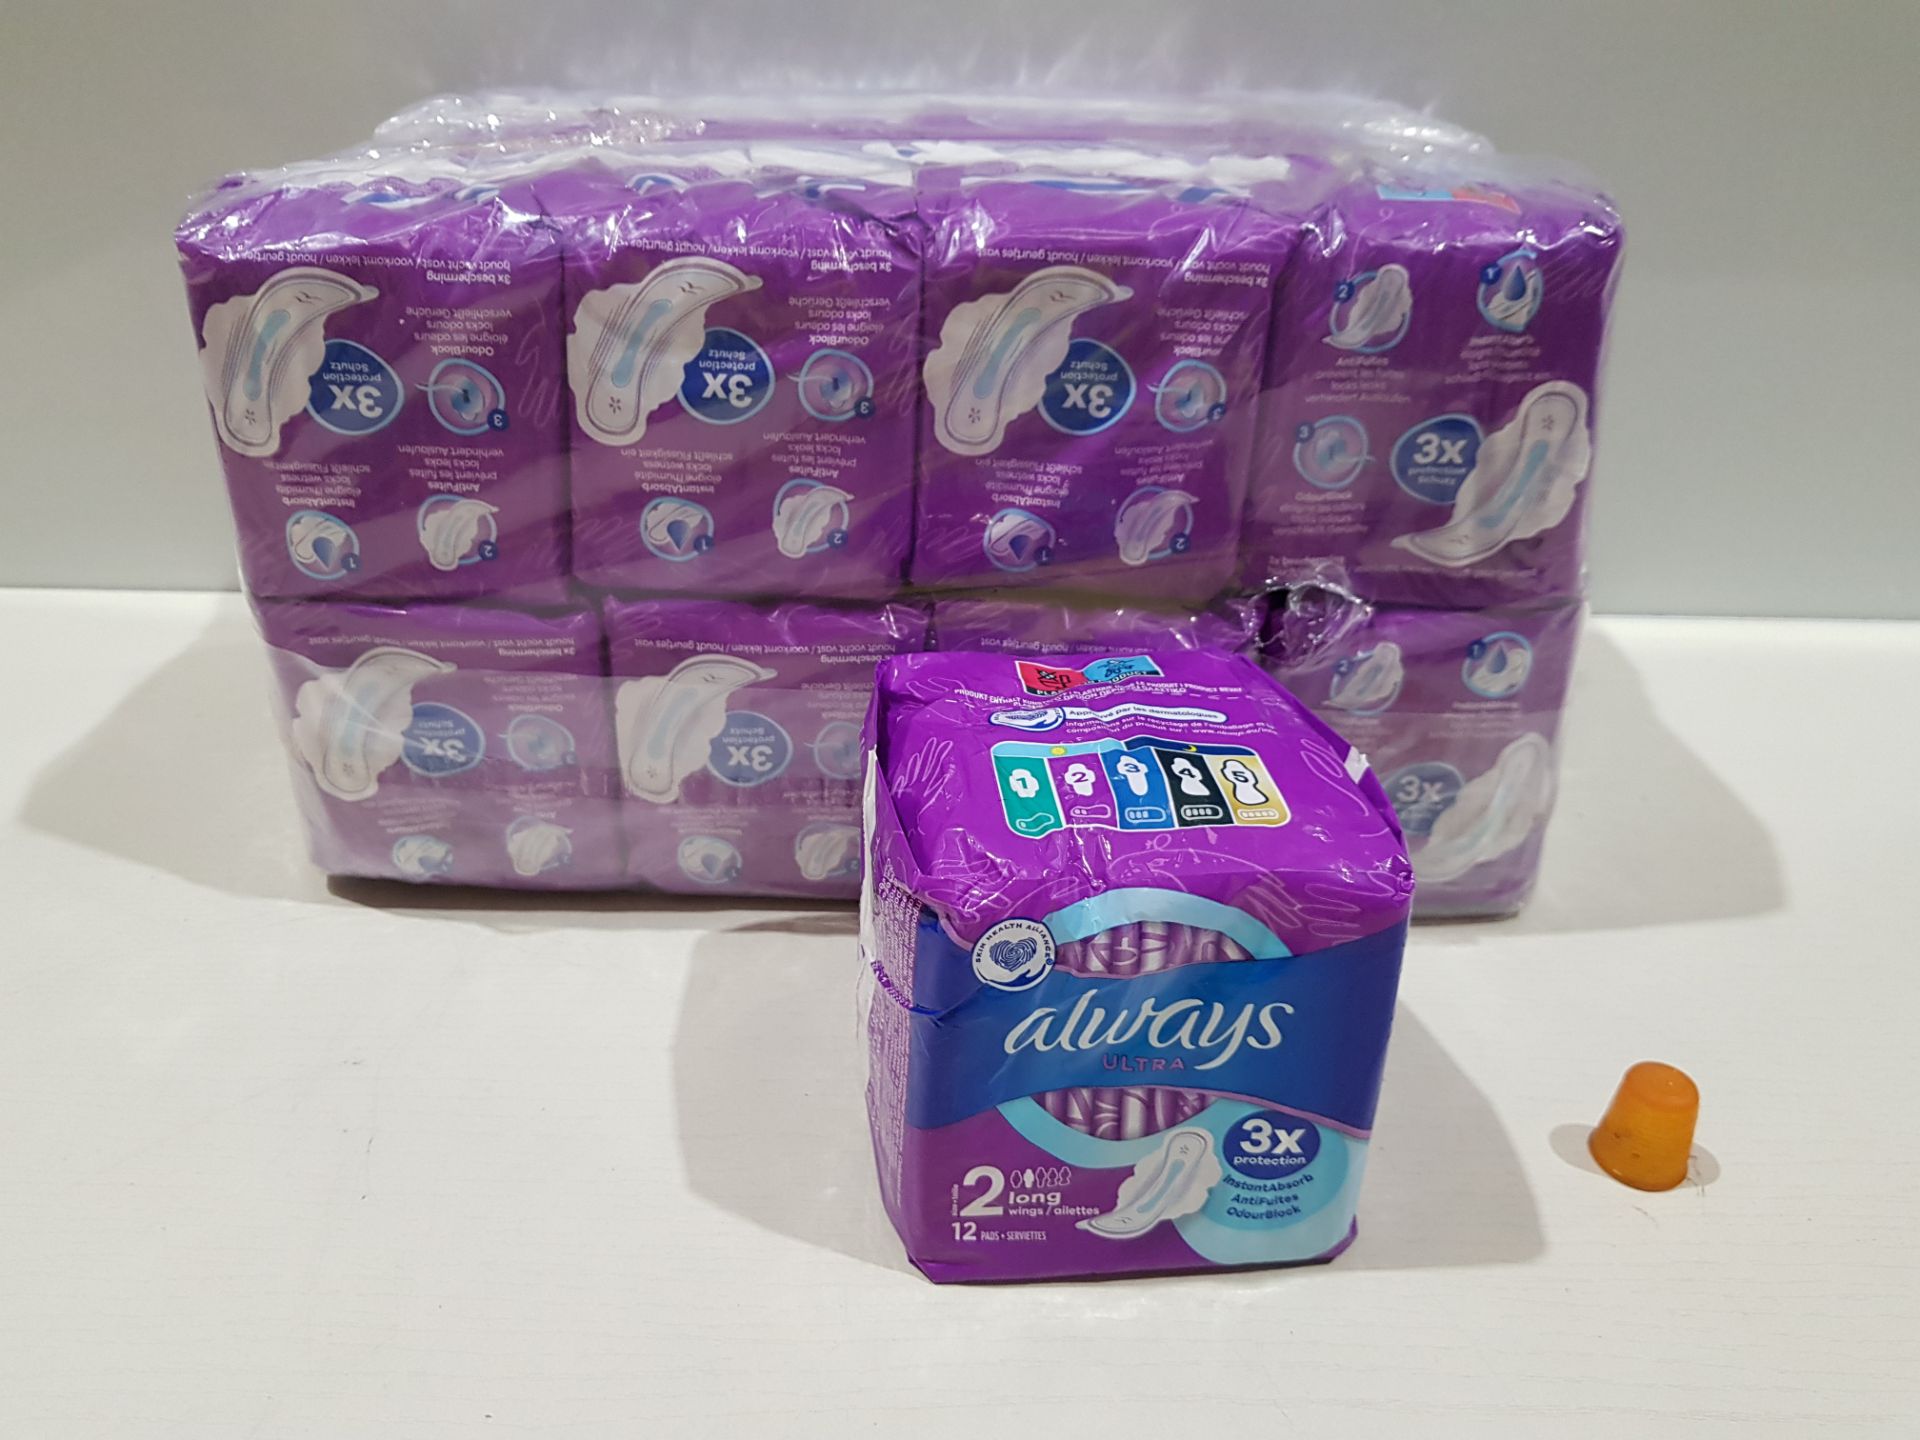 128 X BRAND NEW PACKS OF 12 - ALWAYS ULTRA SCENTED SANITARY PADS - ( SIZE 2 LONG ) - IN 2 BOXES